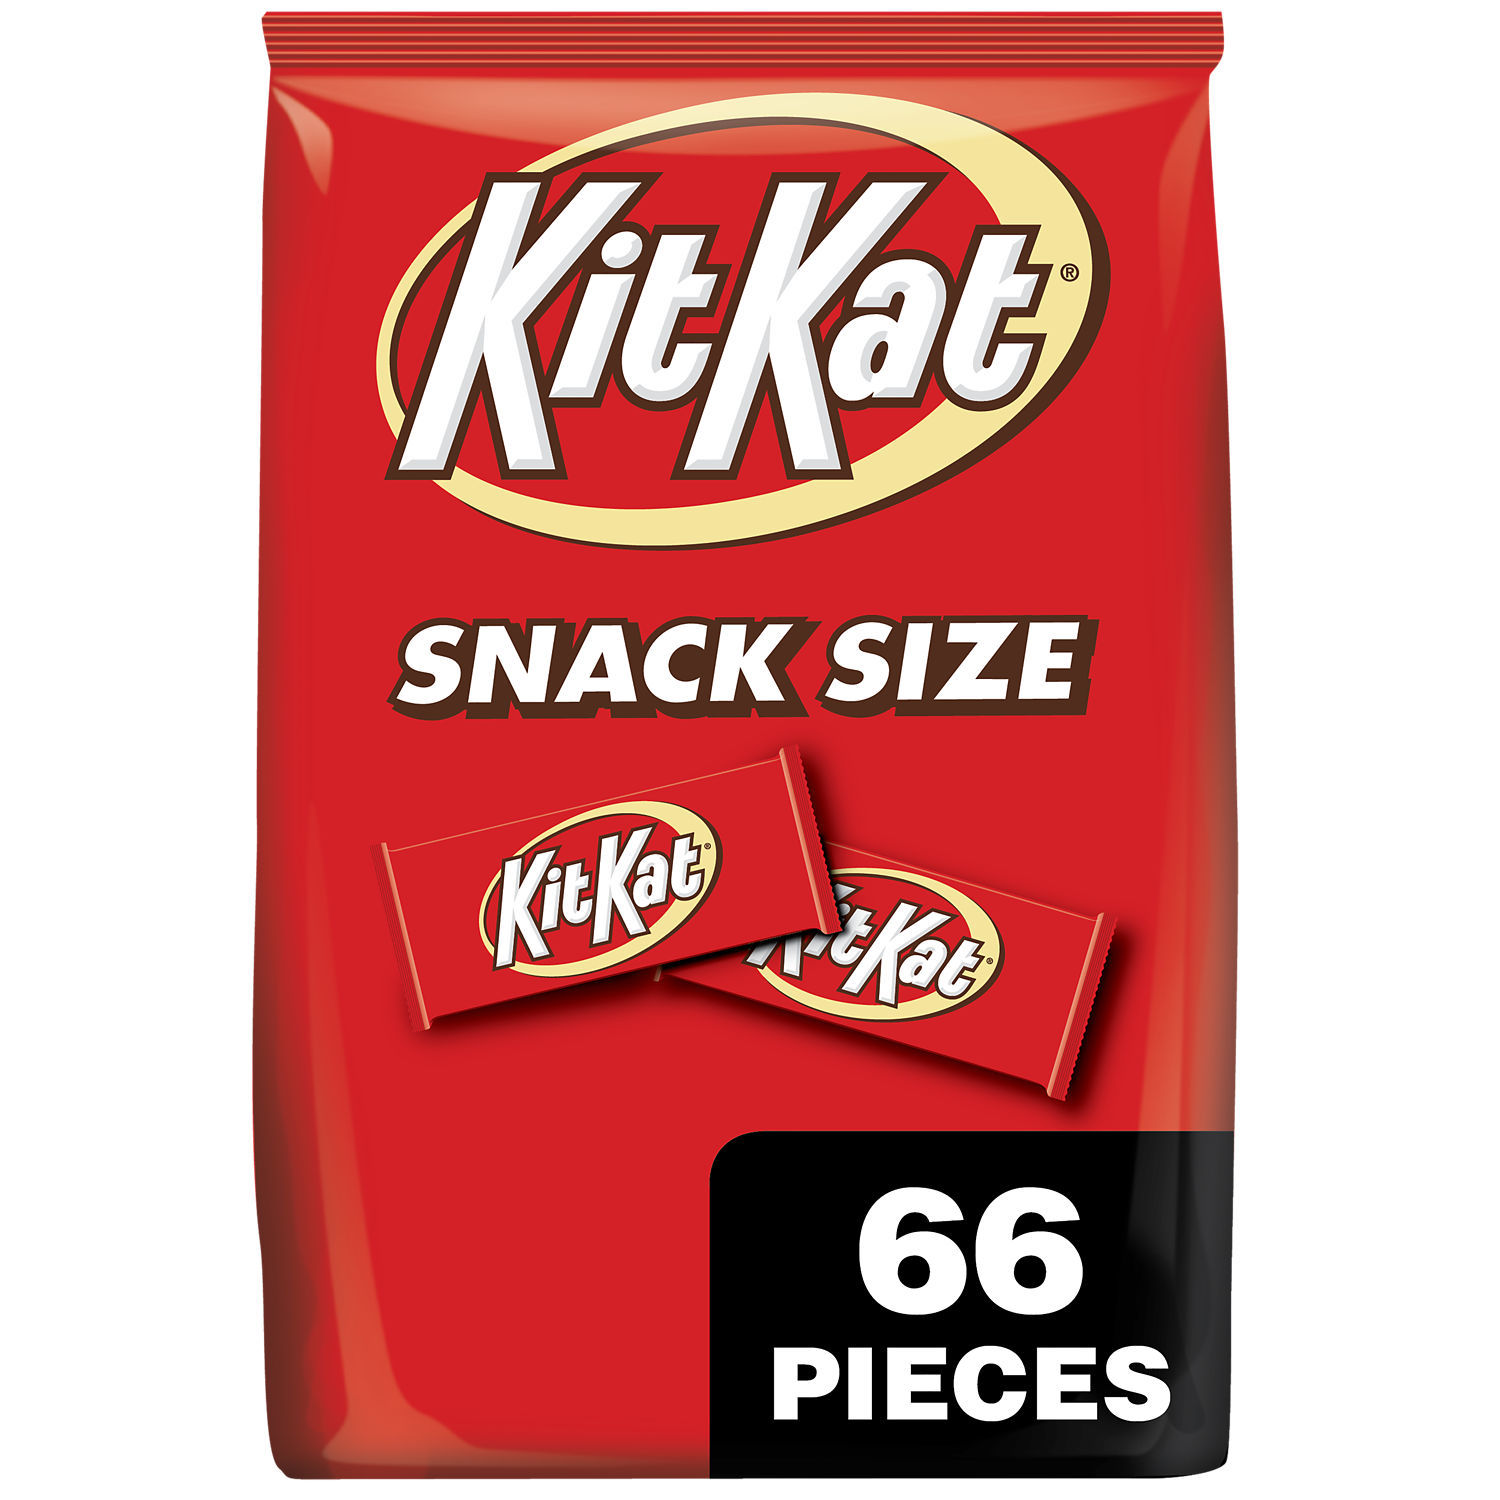 Kit Kat® Milk Chocolate Wafer Snack Size Candy, Bag 32.34 oz, 66 Pieces - image 1 of 9